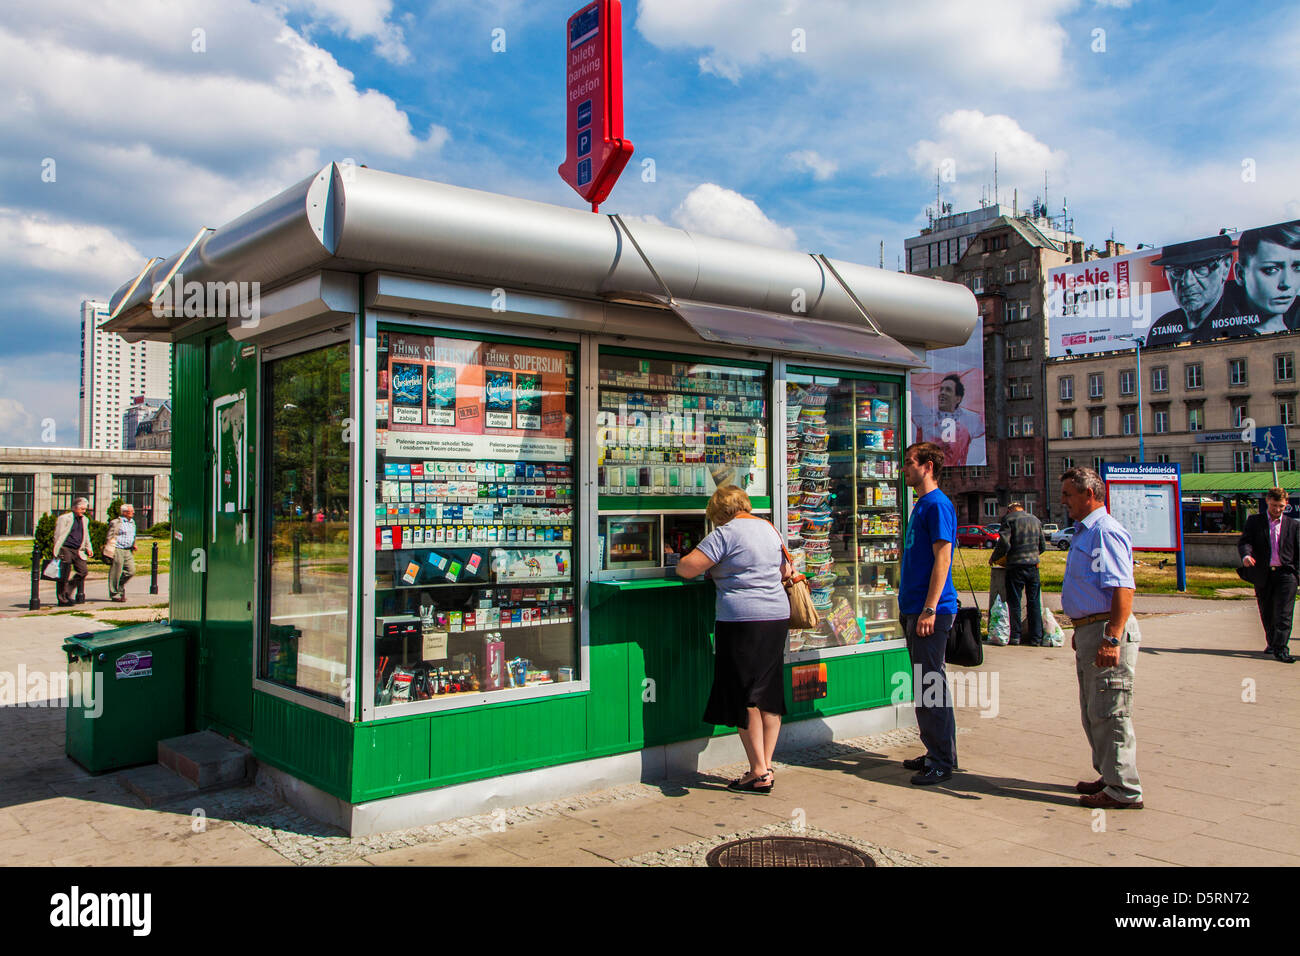 People at a typical kiosk selling tobacco, tickets and magazines in downtown Warsaw, Poland. Stock Photo